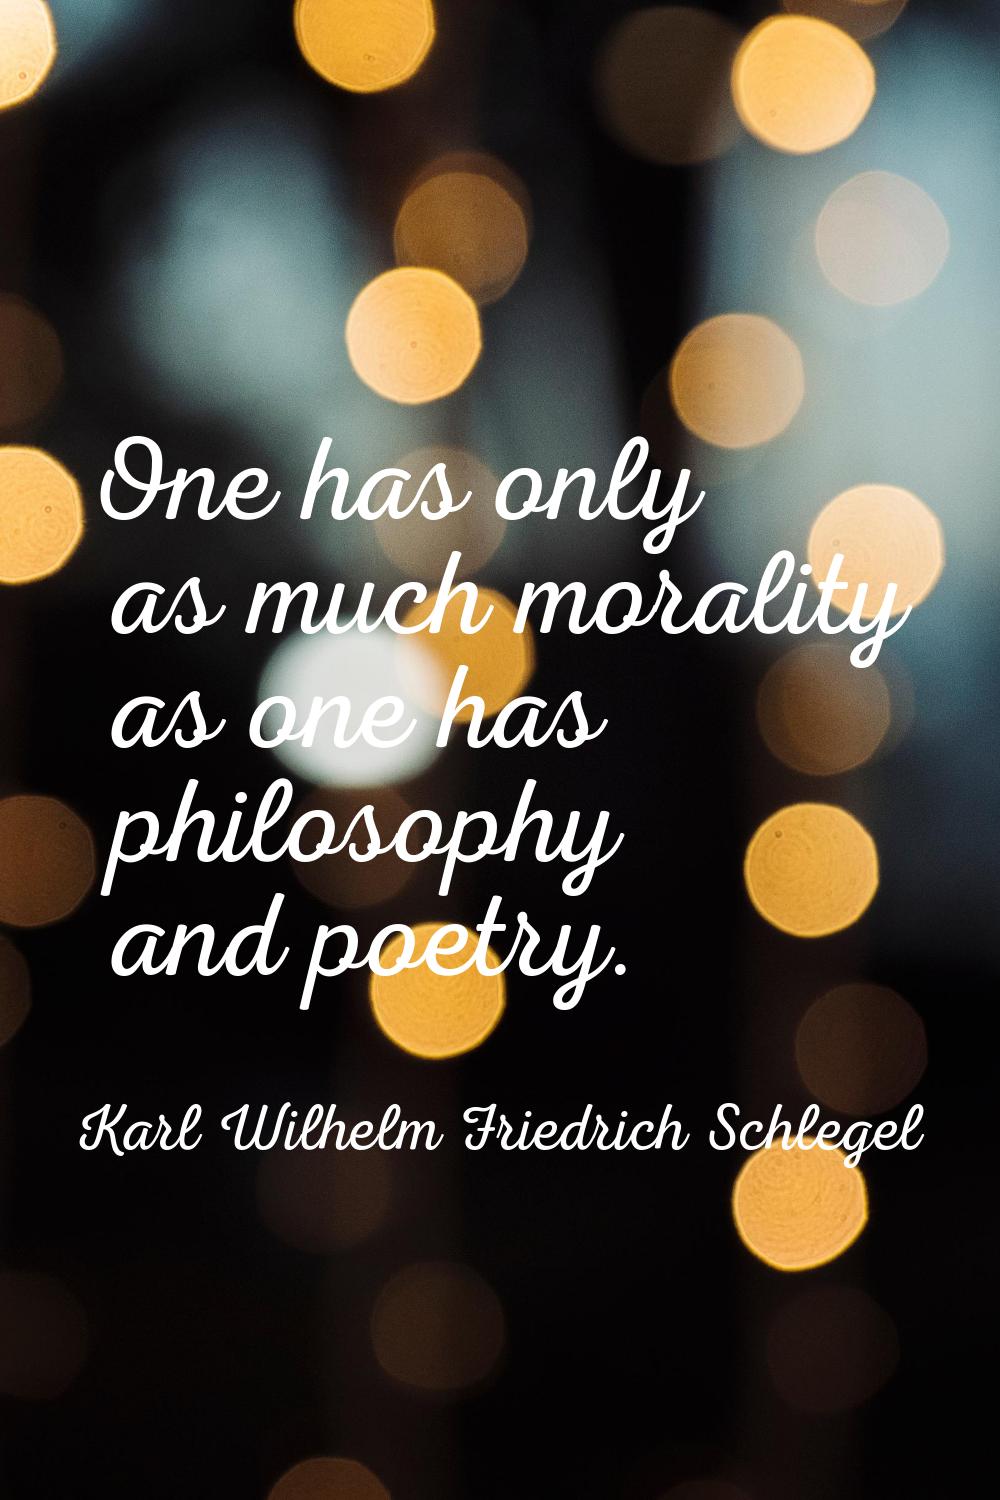 One has only as much morality as one has philosophy and poetry.